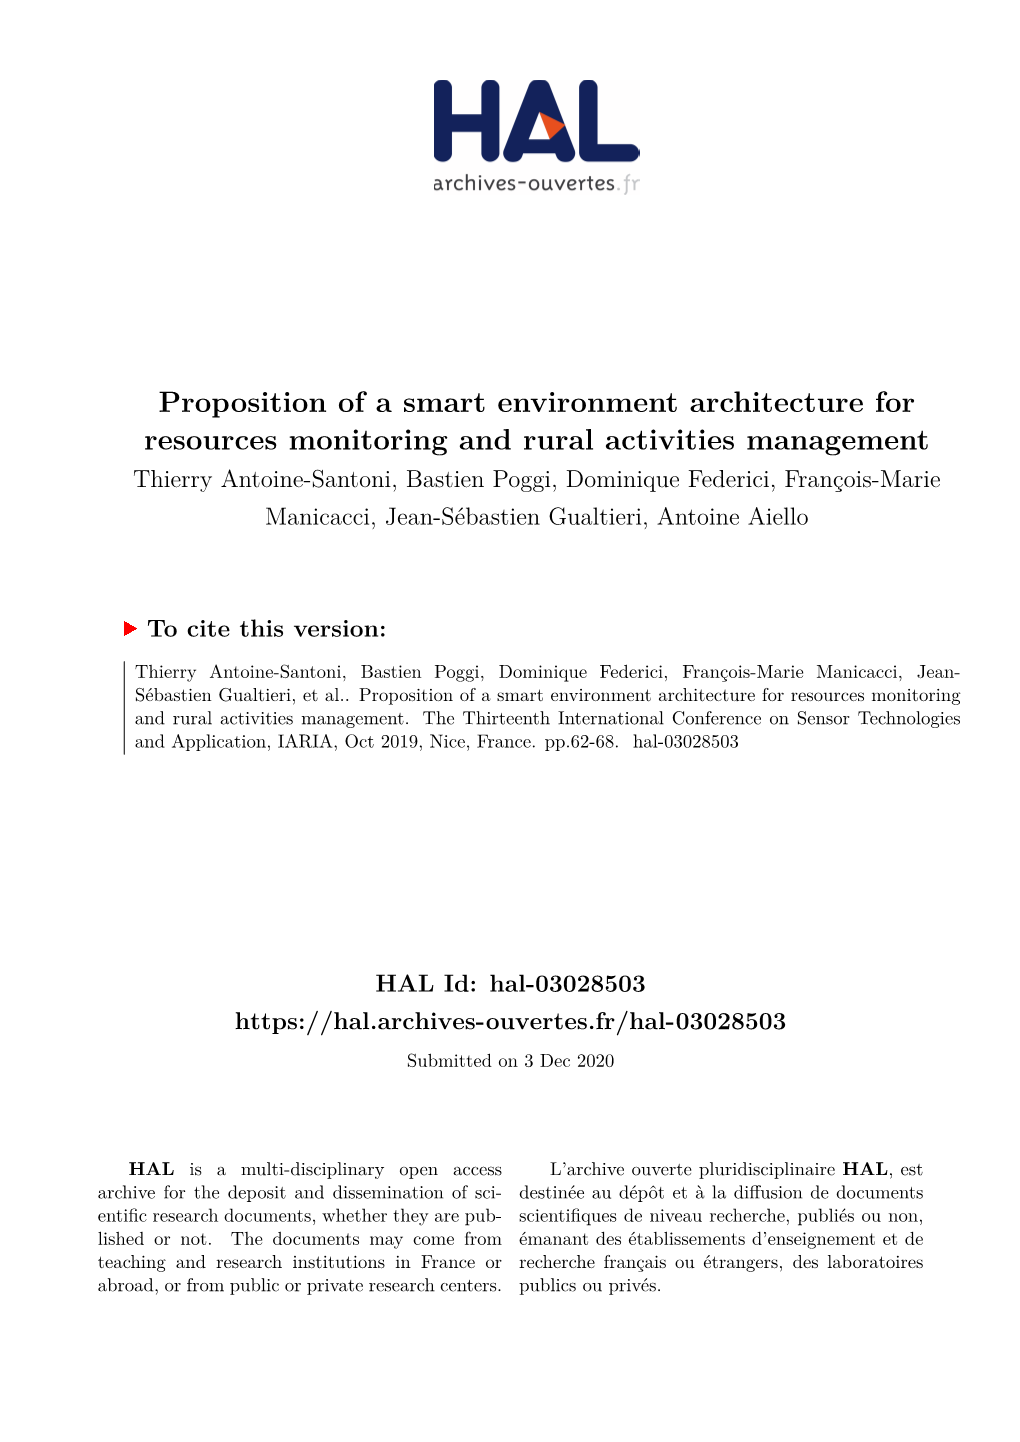 Proposition of a Smart Environment Architecture for Resources